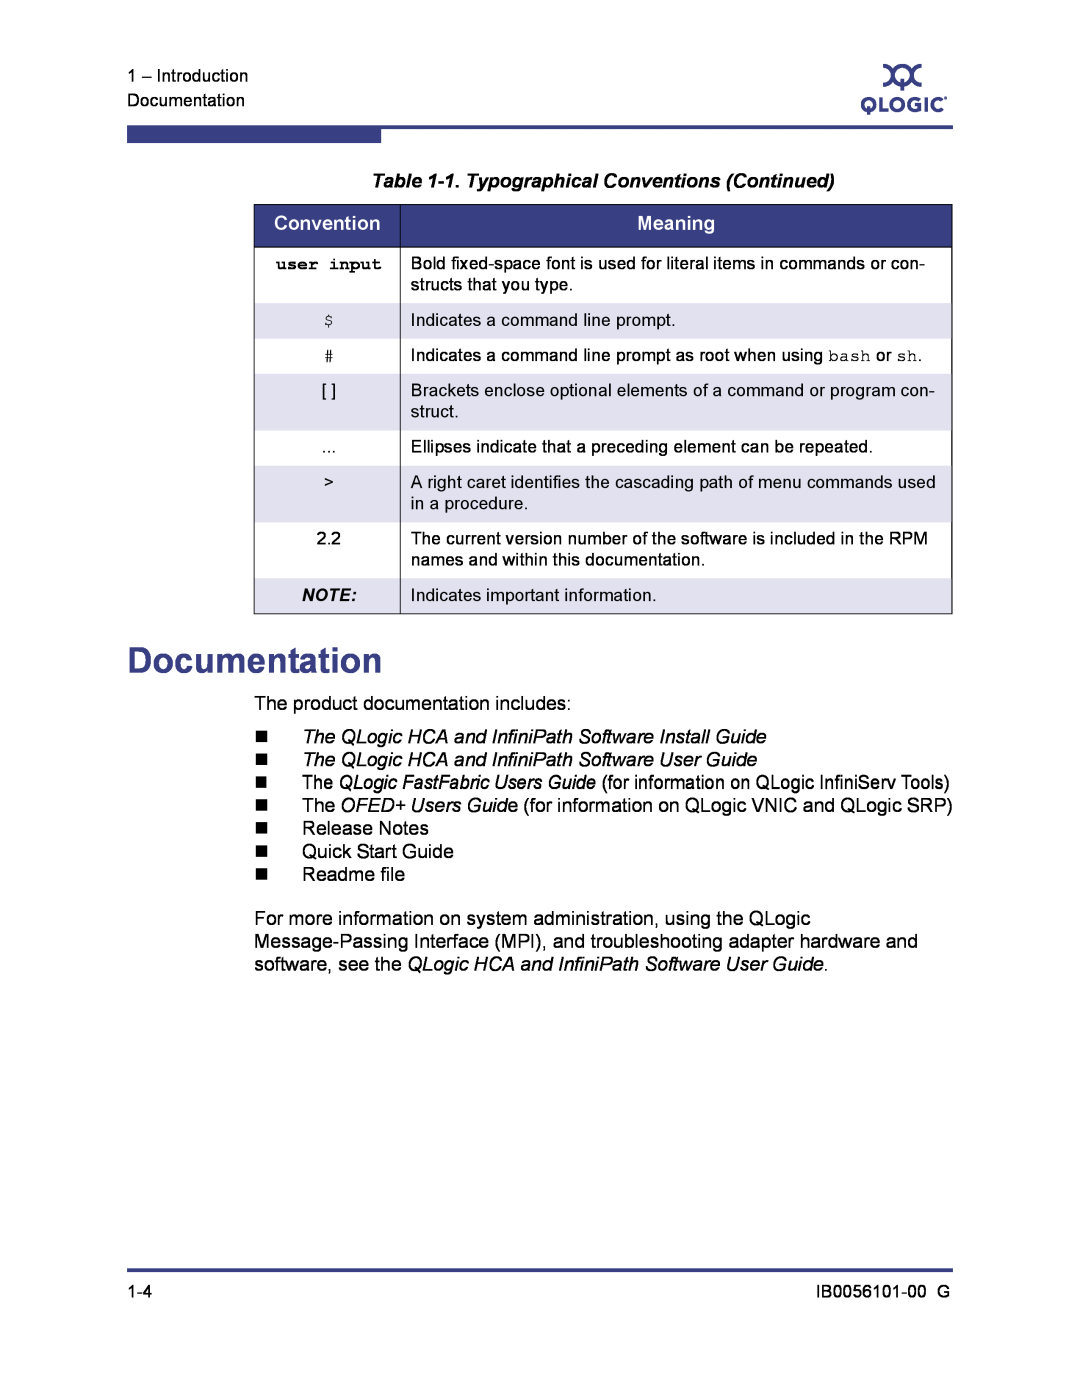 Q-Logic IB0056101-00 G manual Documentation, 1. Typographical Conventions Continued, Meaning 